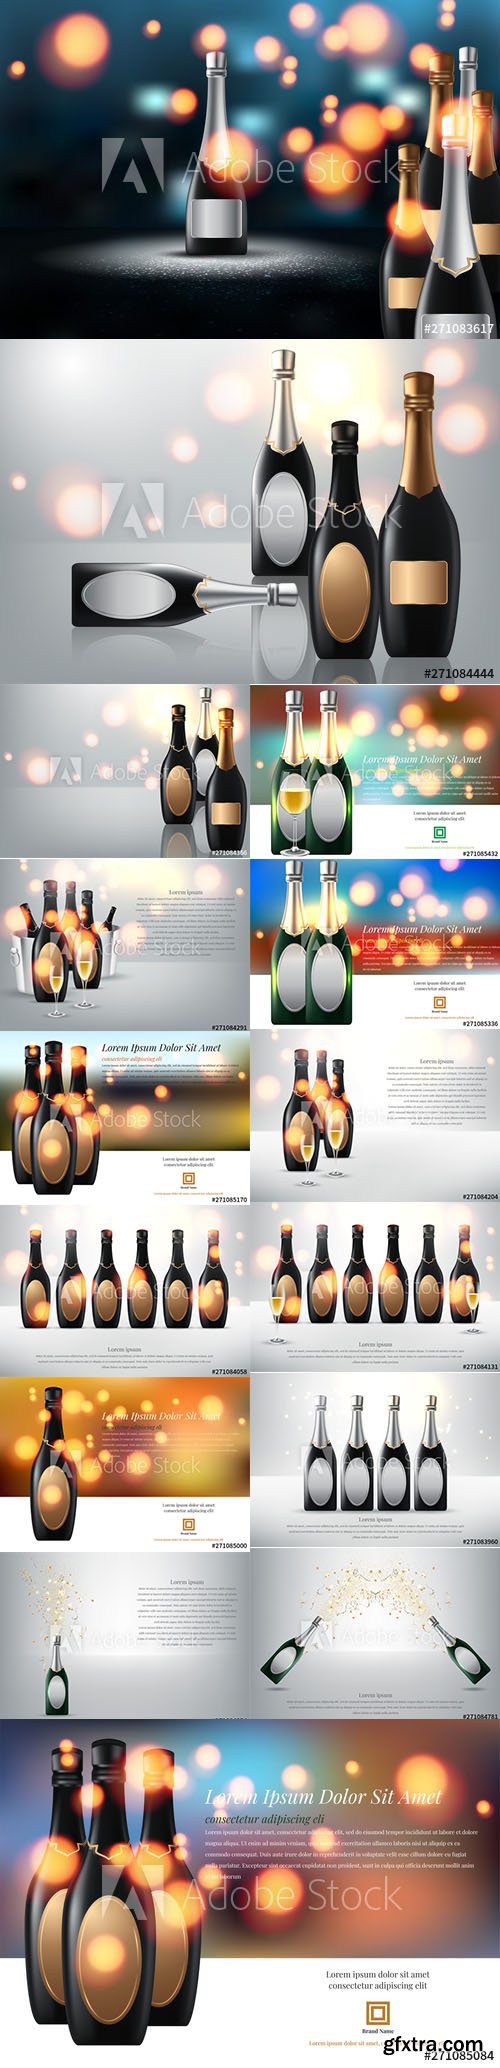 Vector Set - Wineglass and Champagne Wine Bottles Illustration Vol2